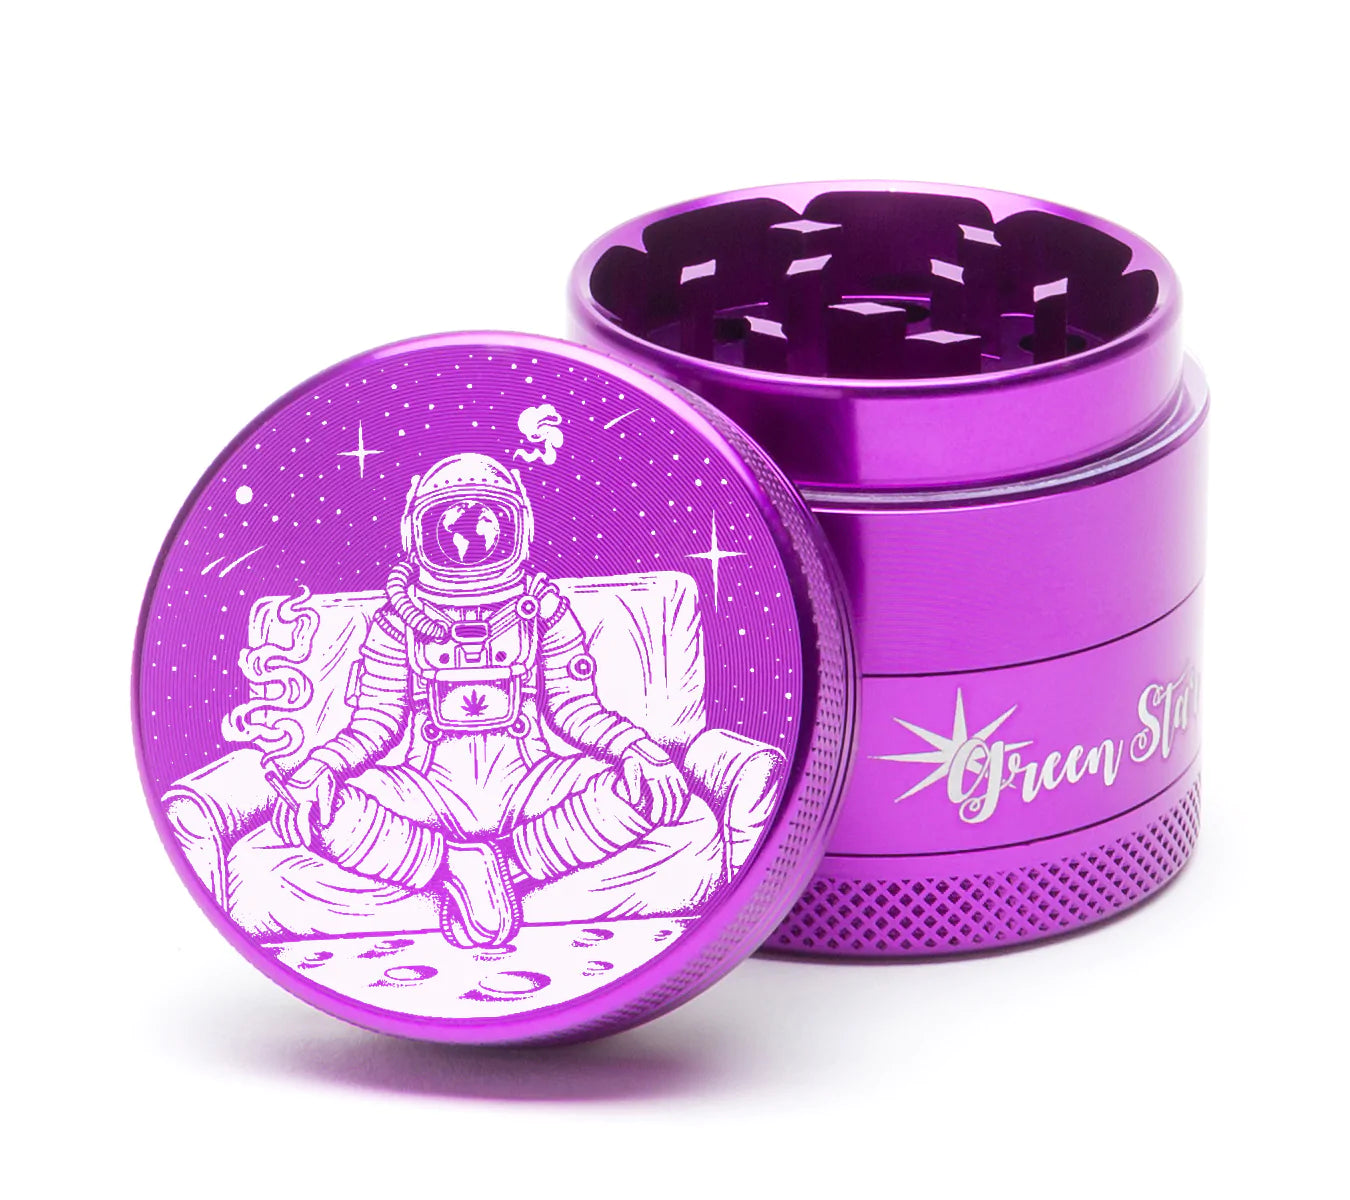 Green Star - Chillin On The Moon Grinder (4 pcs)